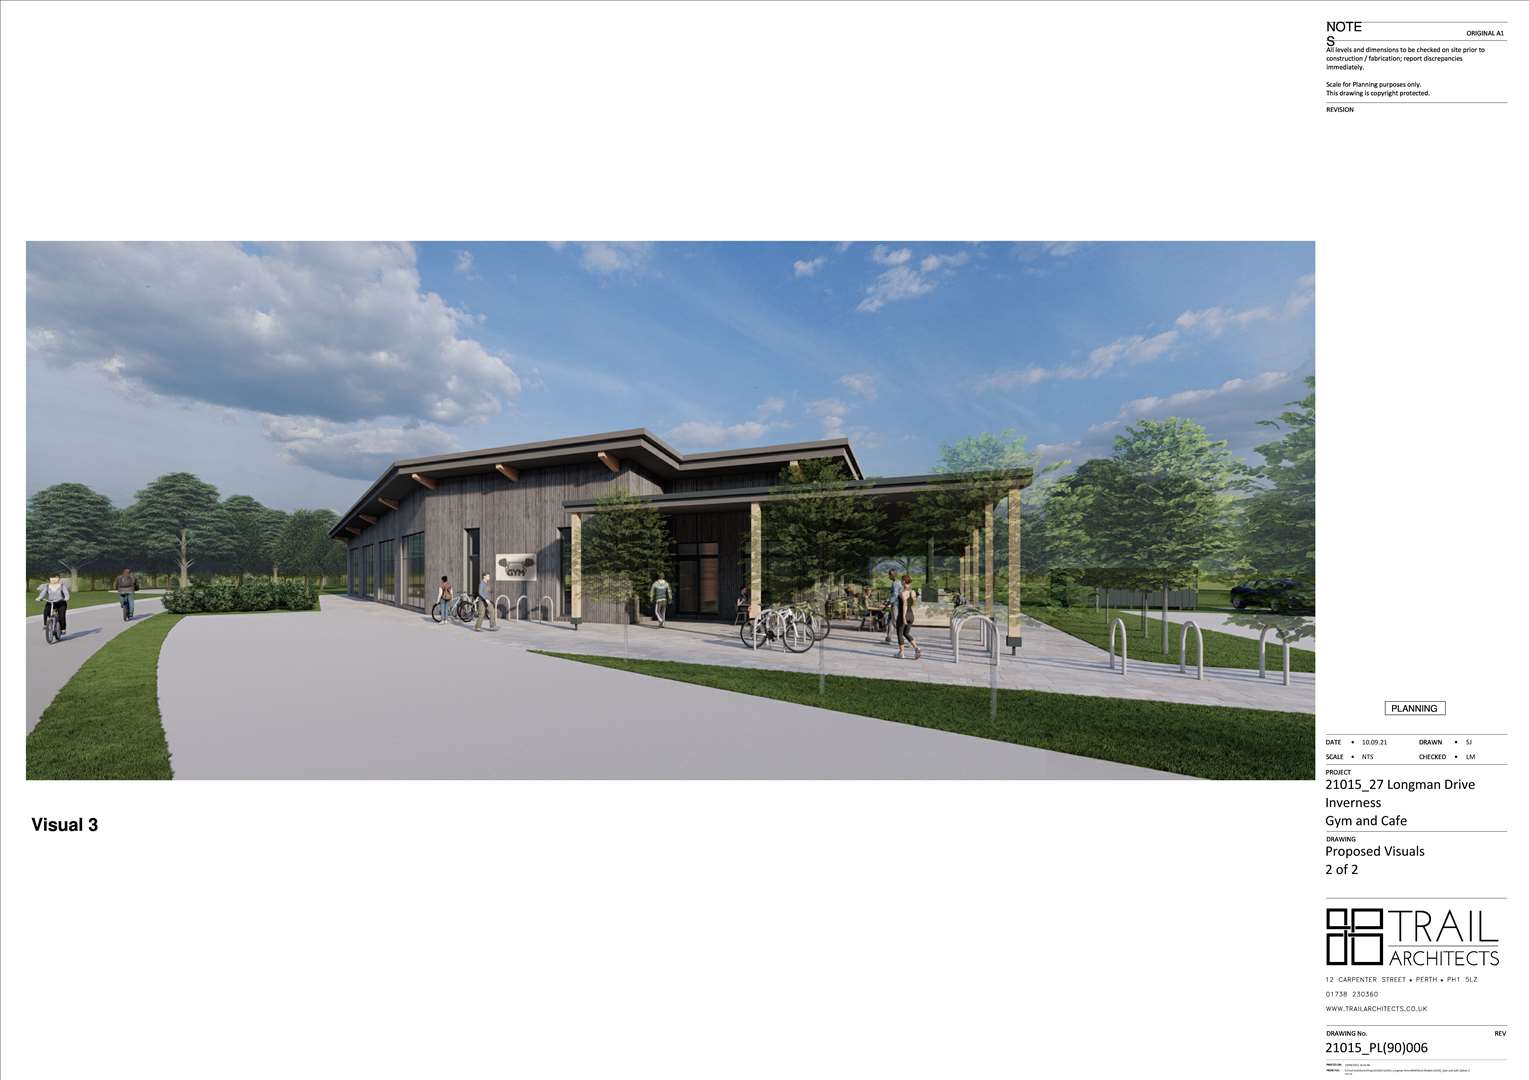 Artists' impression of the gym and cafe planning proosal for Longman Drive